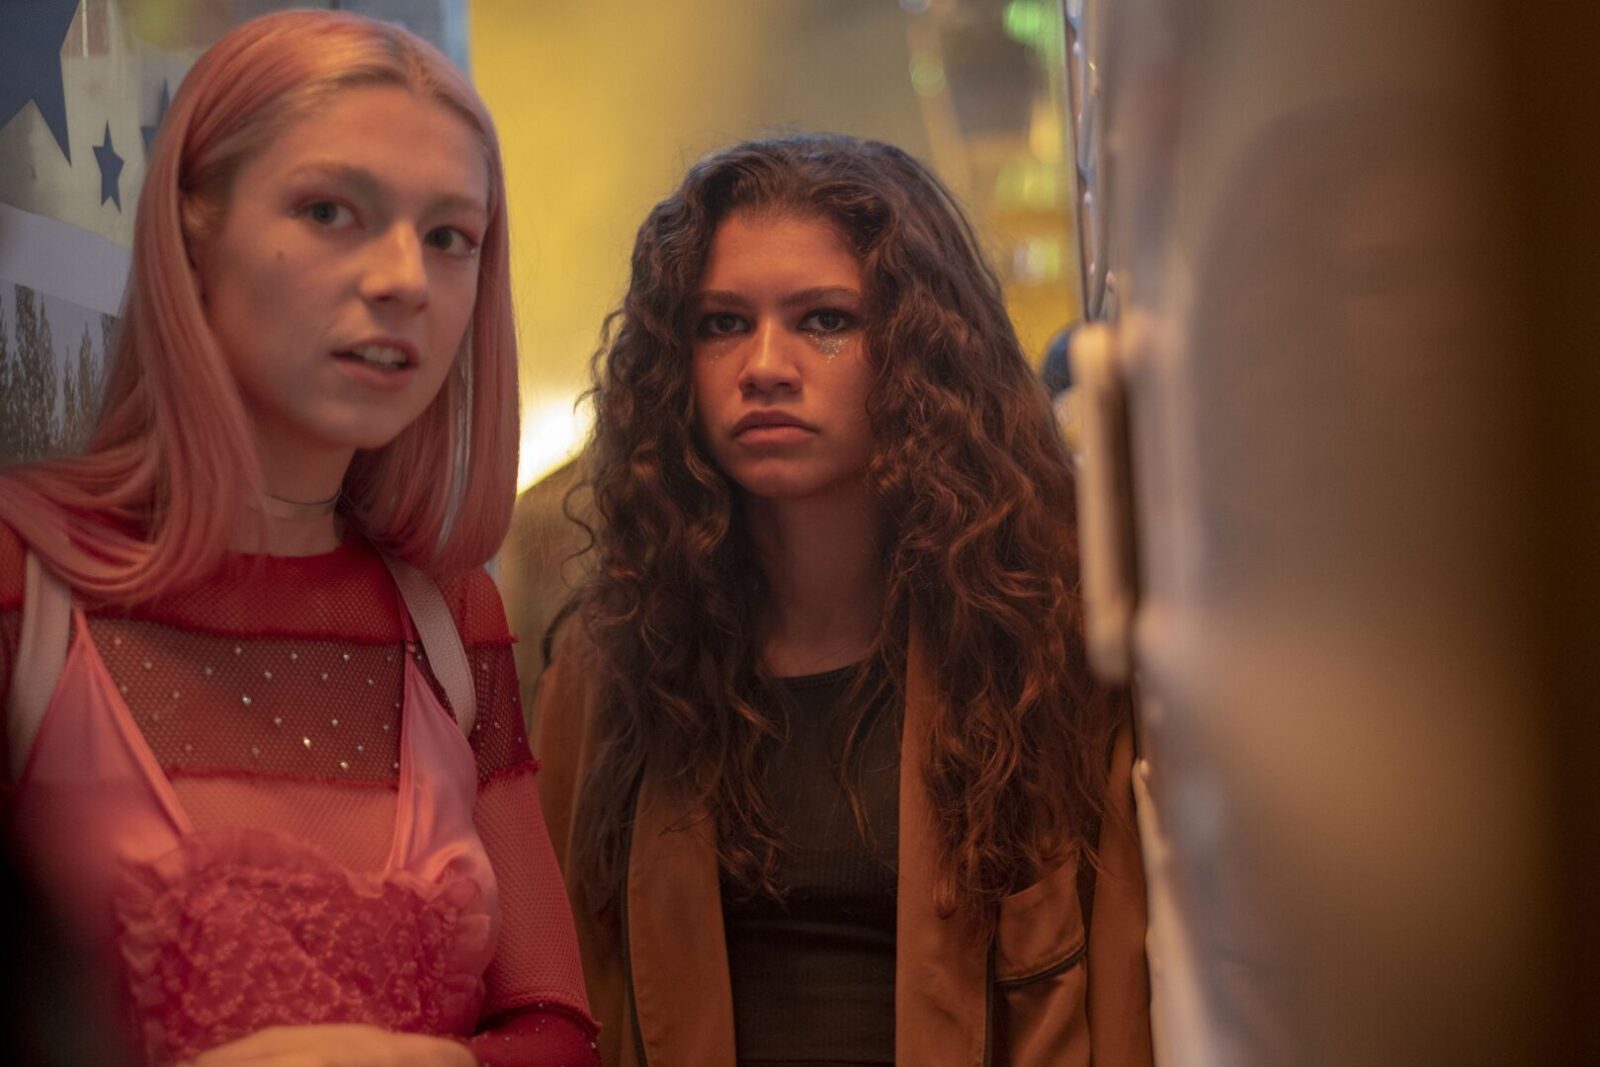 Euphoria Season 2: Release Date, Cast, and Where to watch